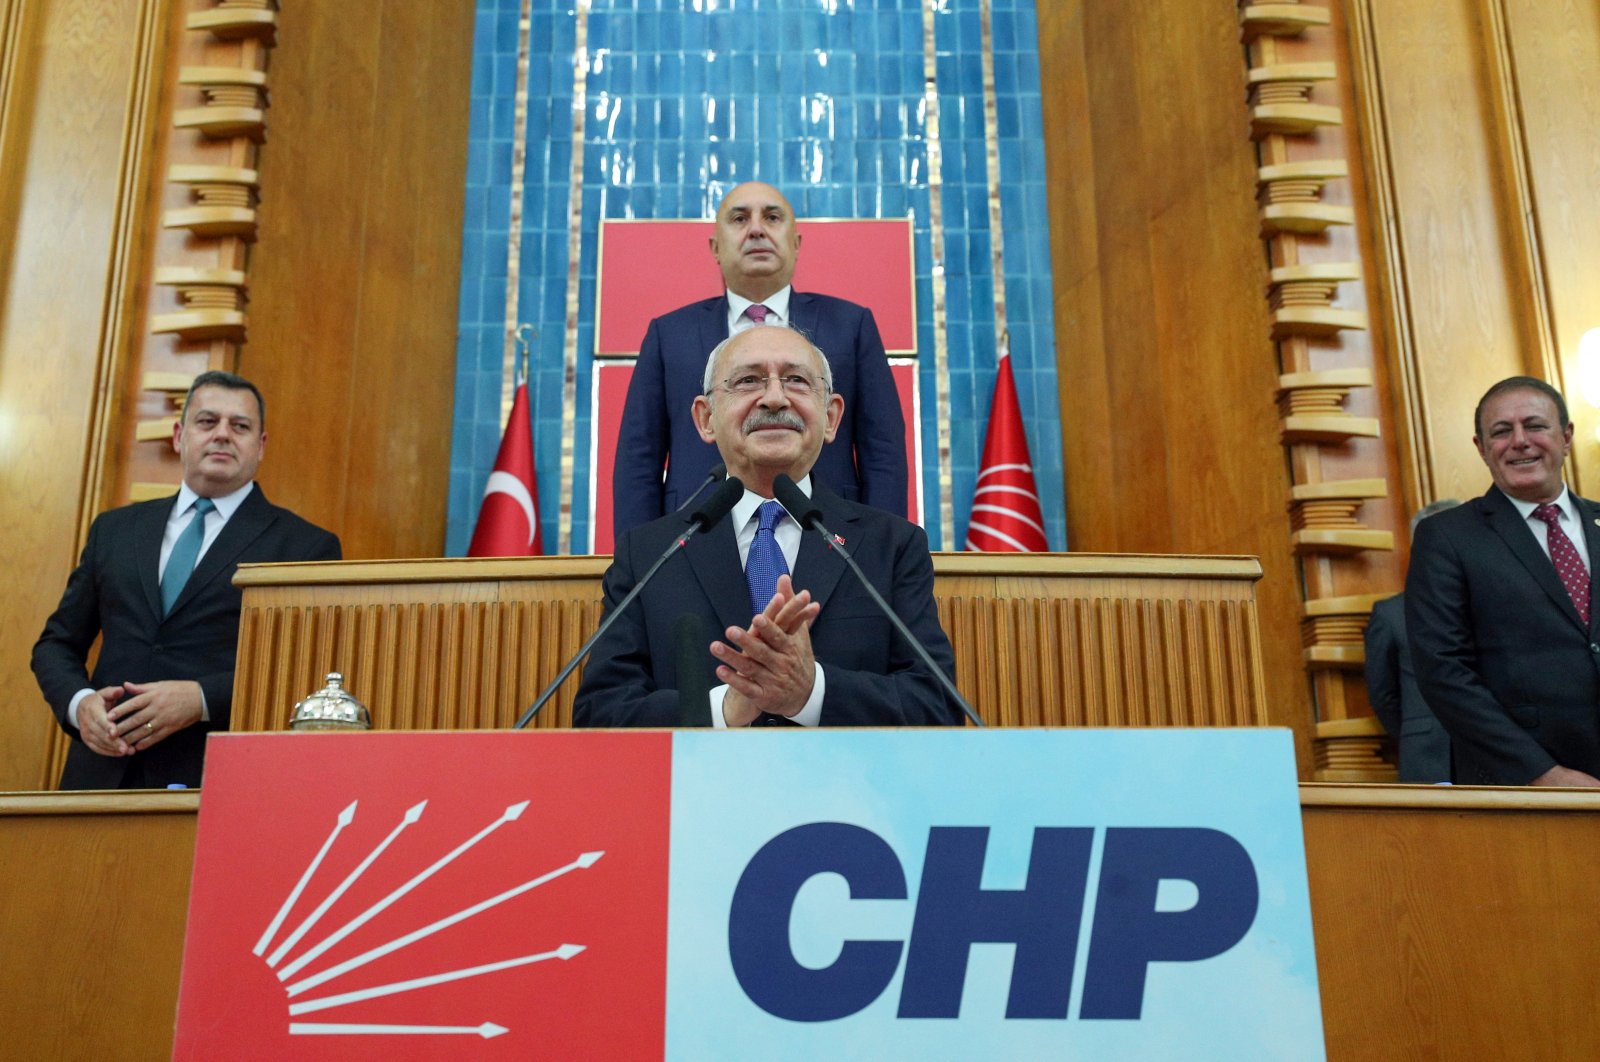 Kemal Kılıçdaroğlu, chairperson of the main opposition Republican People&#039;s Party (CHP), addresses members of his party during a meeting at Parliament in Ankara, Türkiye, Oct. 4, 2022. (Reuters Photo)